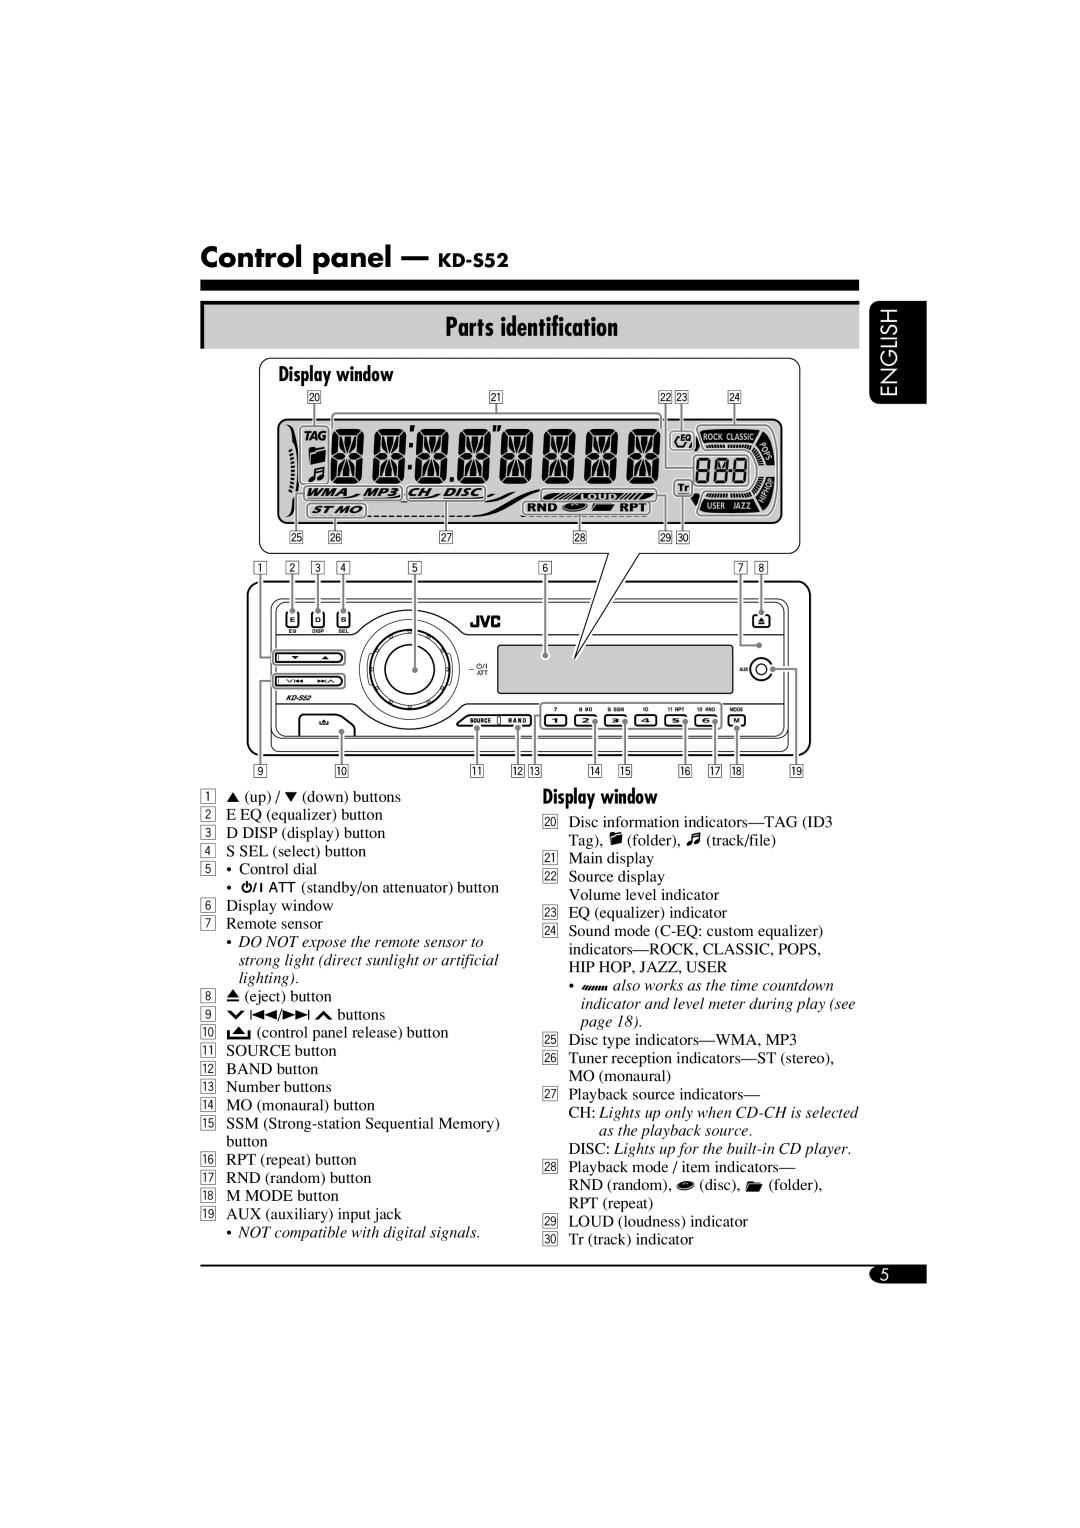 JVC manual Control panel - KD-S52, Parts identification, Display window, English, NOT compatible with digital signals 